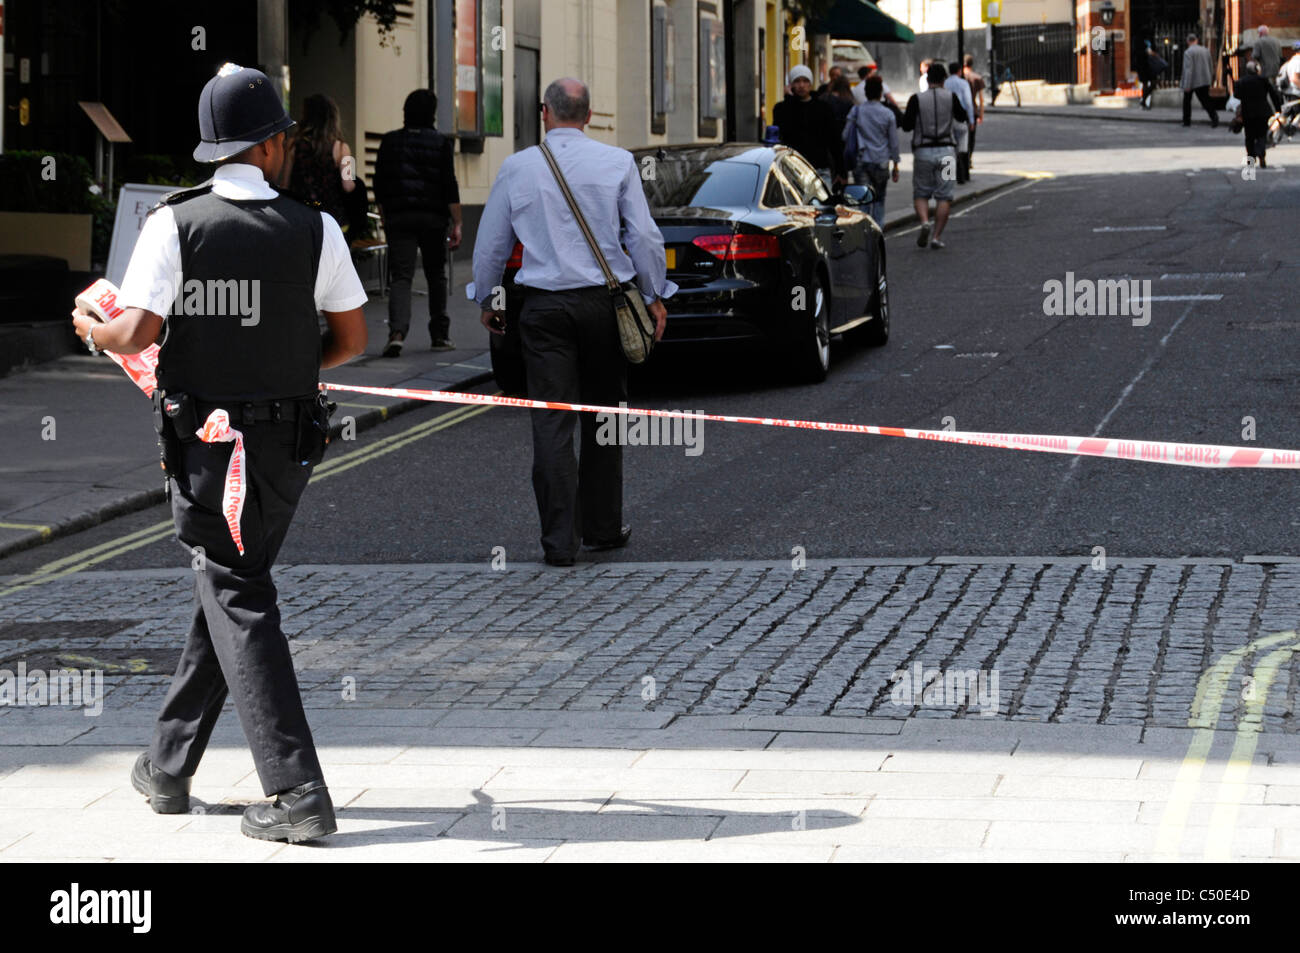 Police officer rolling out tape to cordon off access to 'The Strand' in London due to major incident Stock Photo